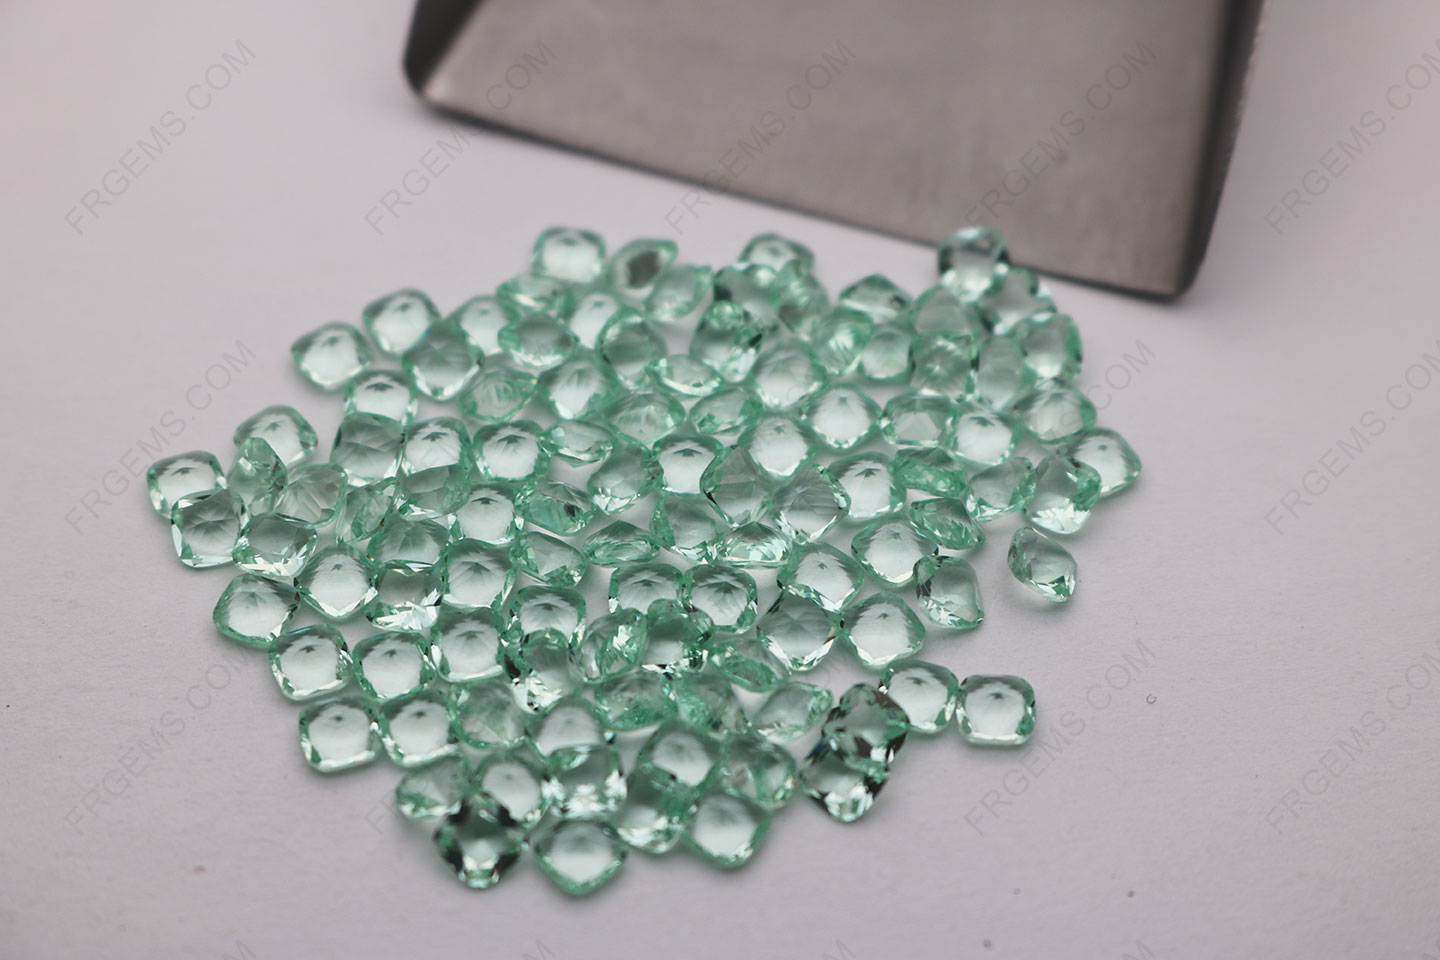 Glass Mint Green Tourmaline color BE08# Cushion shape Faceted 4x4mm Loose gemstones wholesale from China